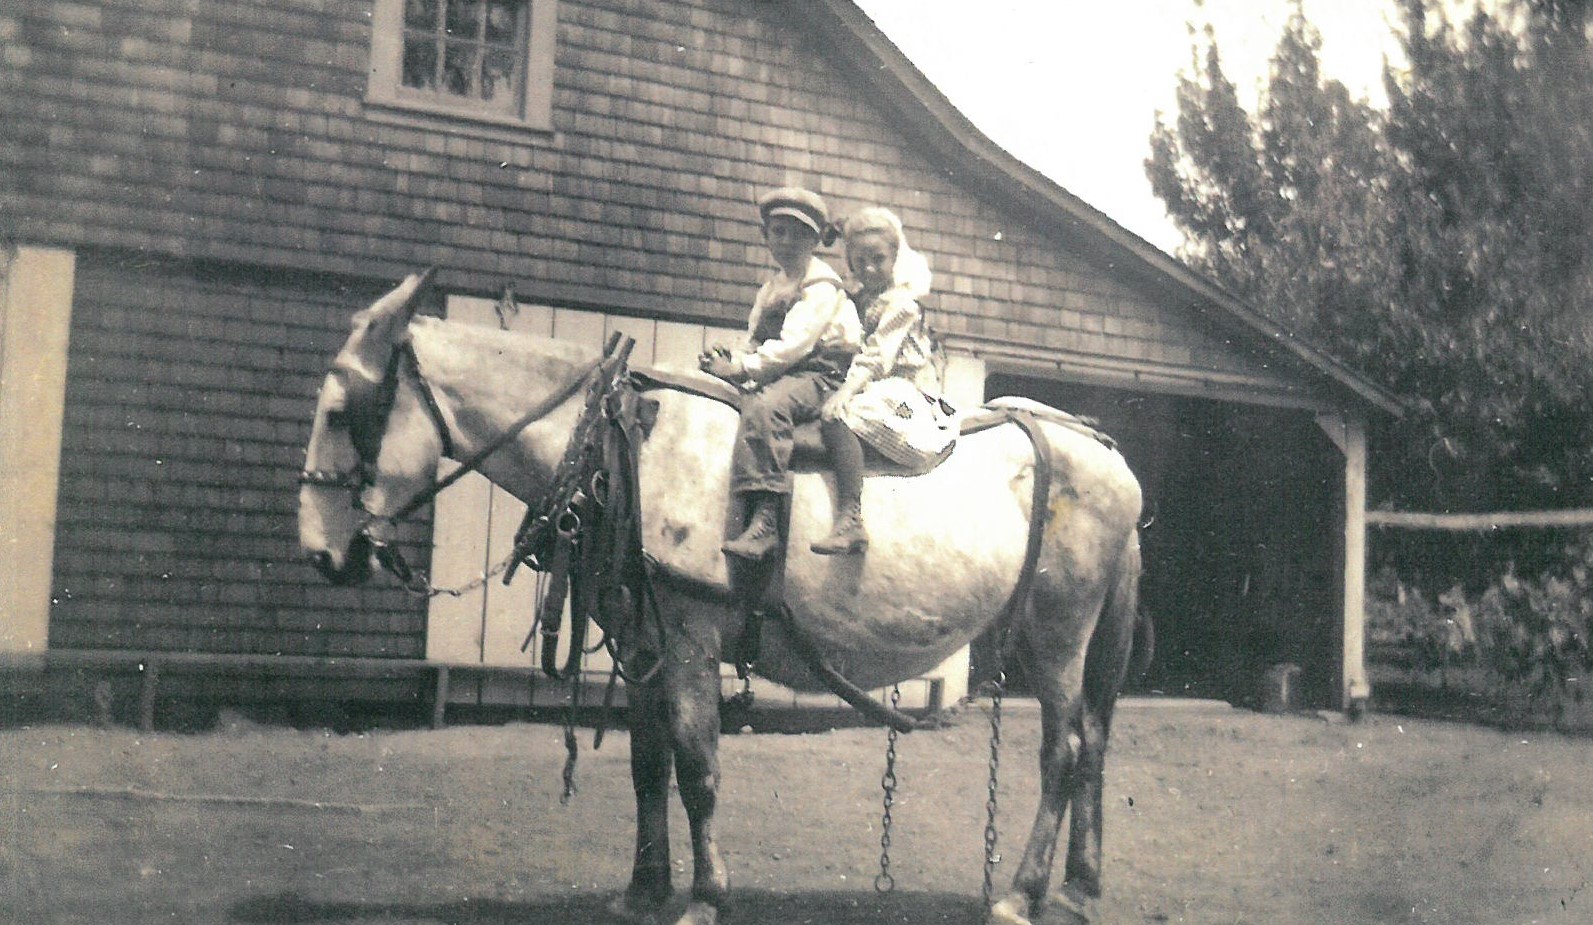 Hugh (Tom) and Claudine are pictured on horse at the Bell Ranch. 